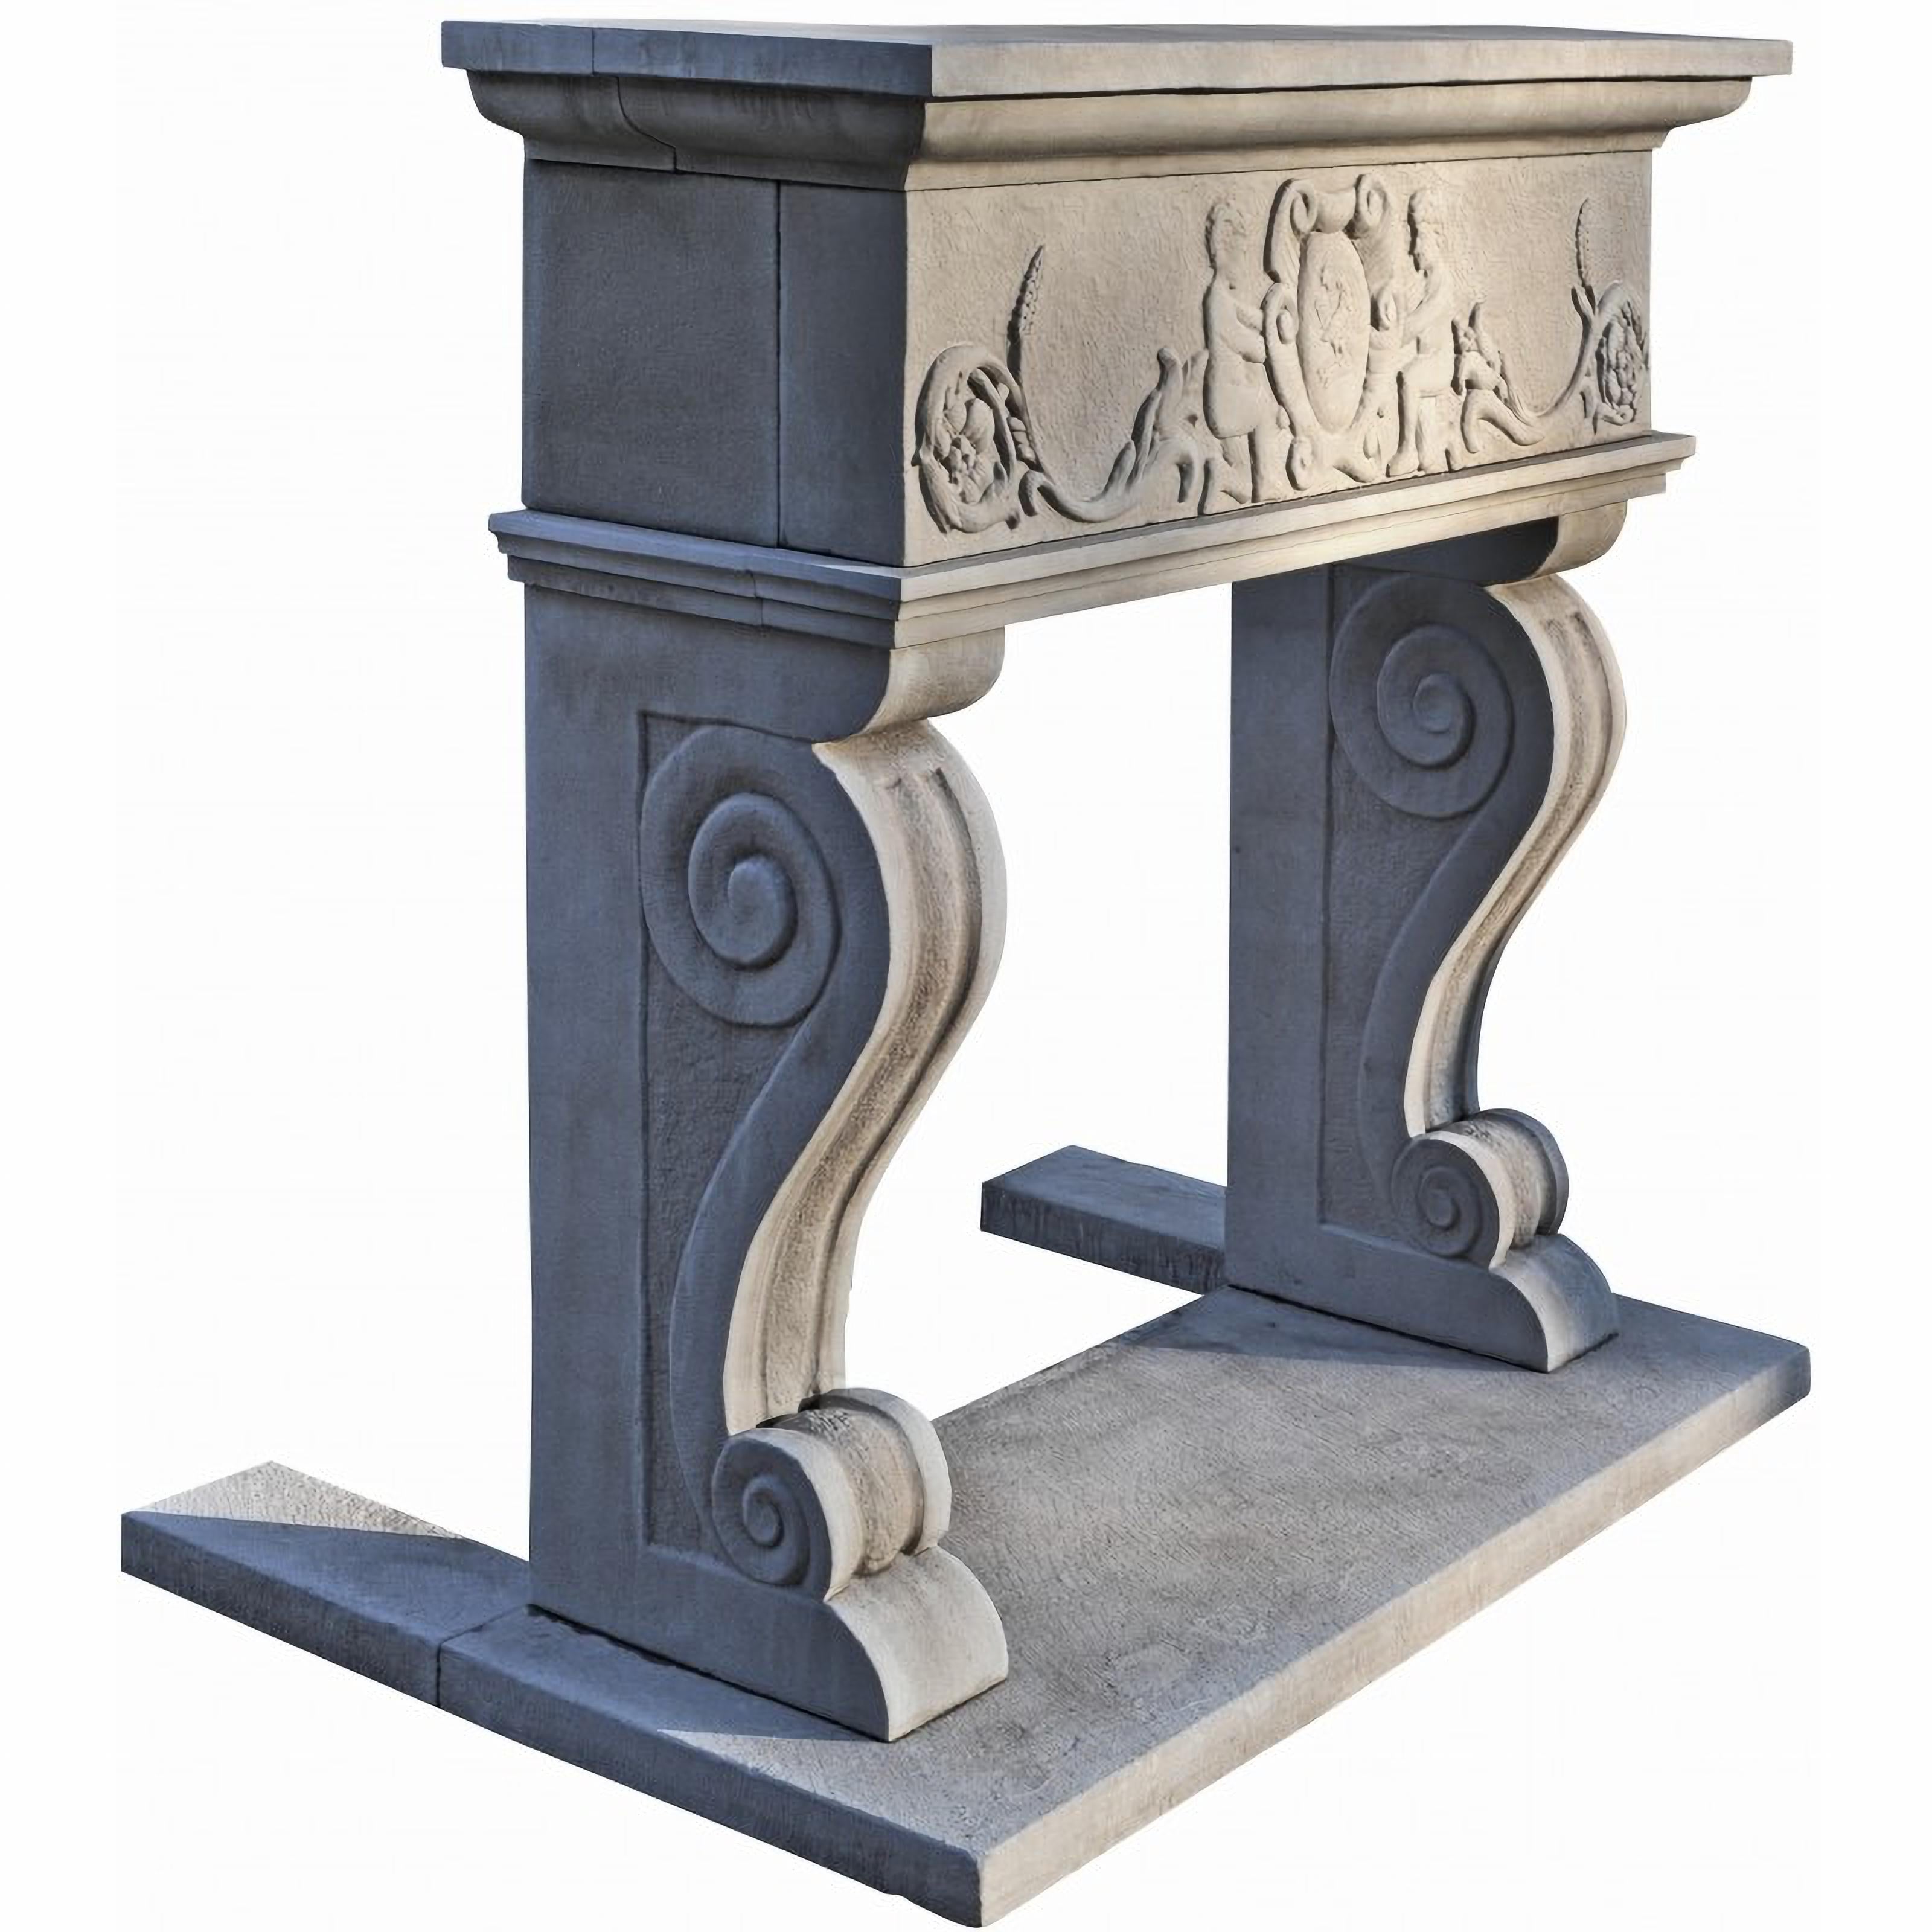 Hand-Crafted Italian Fireplace with Emblem and Putti Stone Serena Early 20th Century For Sale